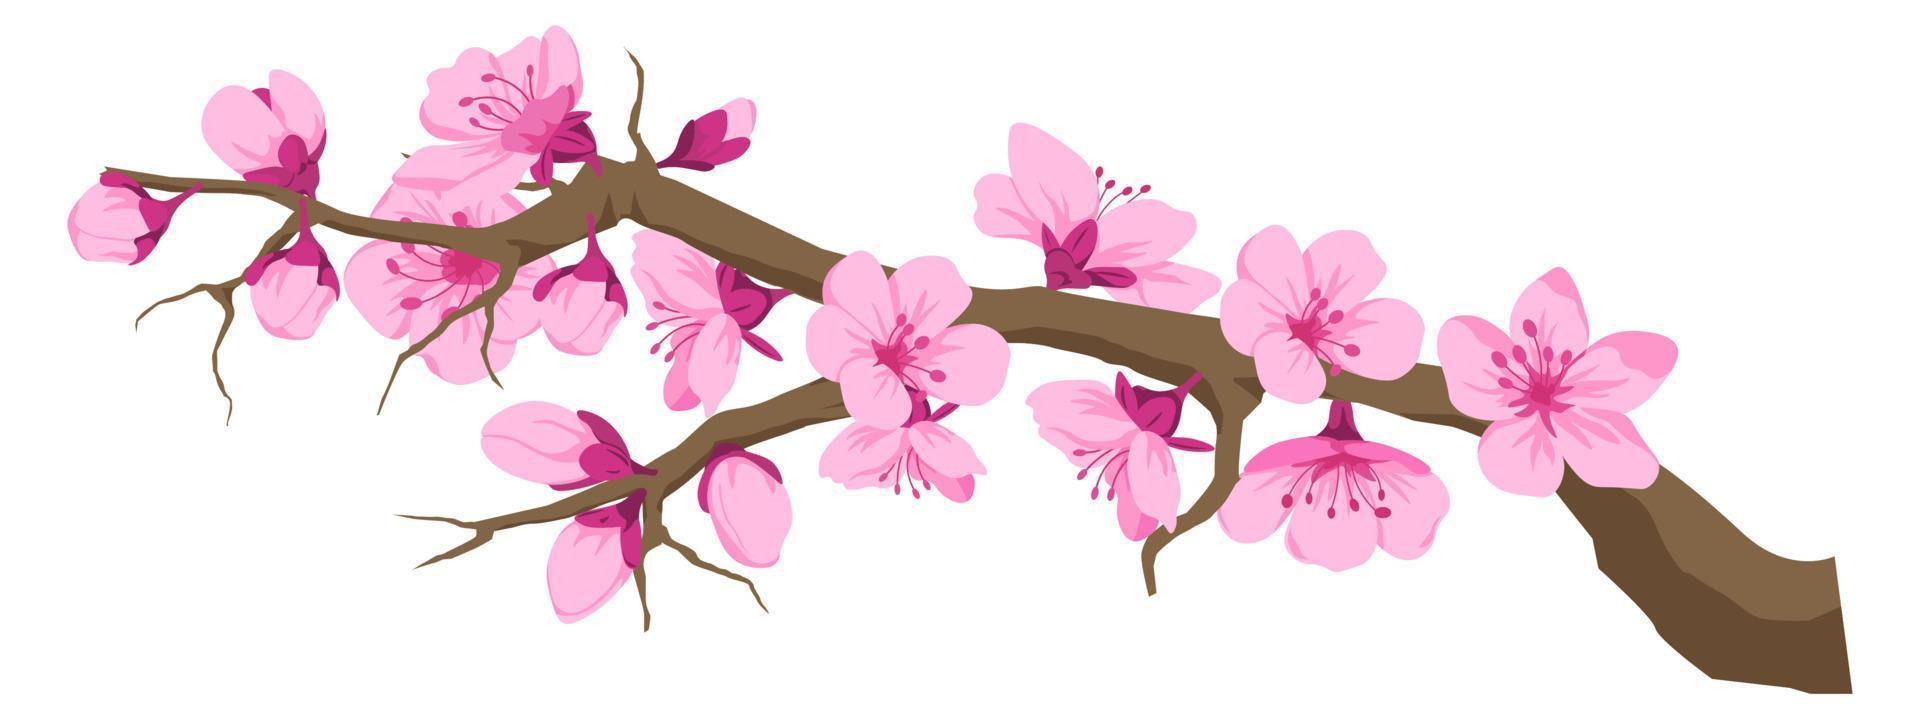 Twig with cherry blossom, sakura flowers on branch vector